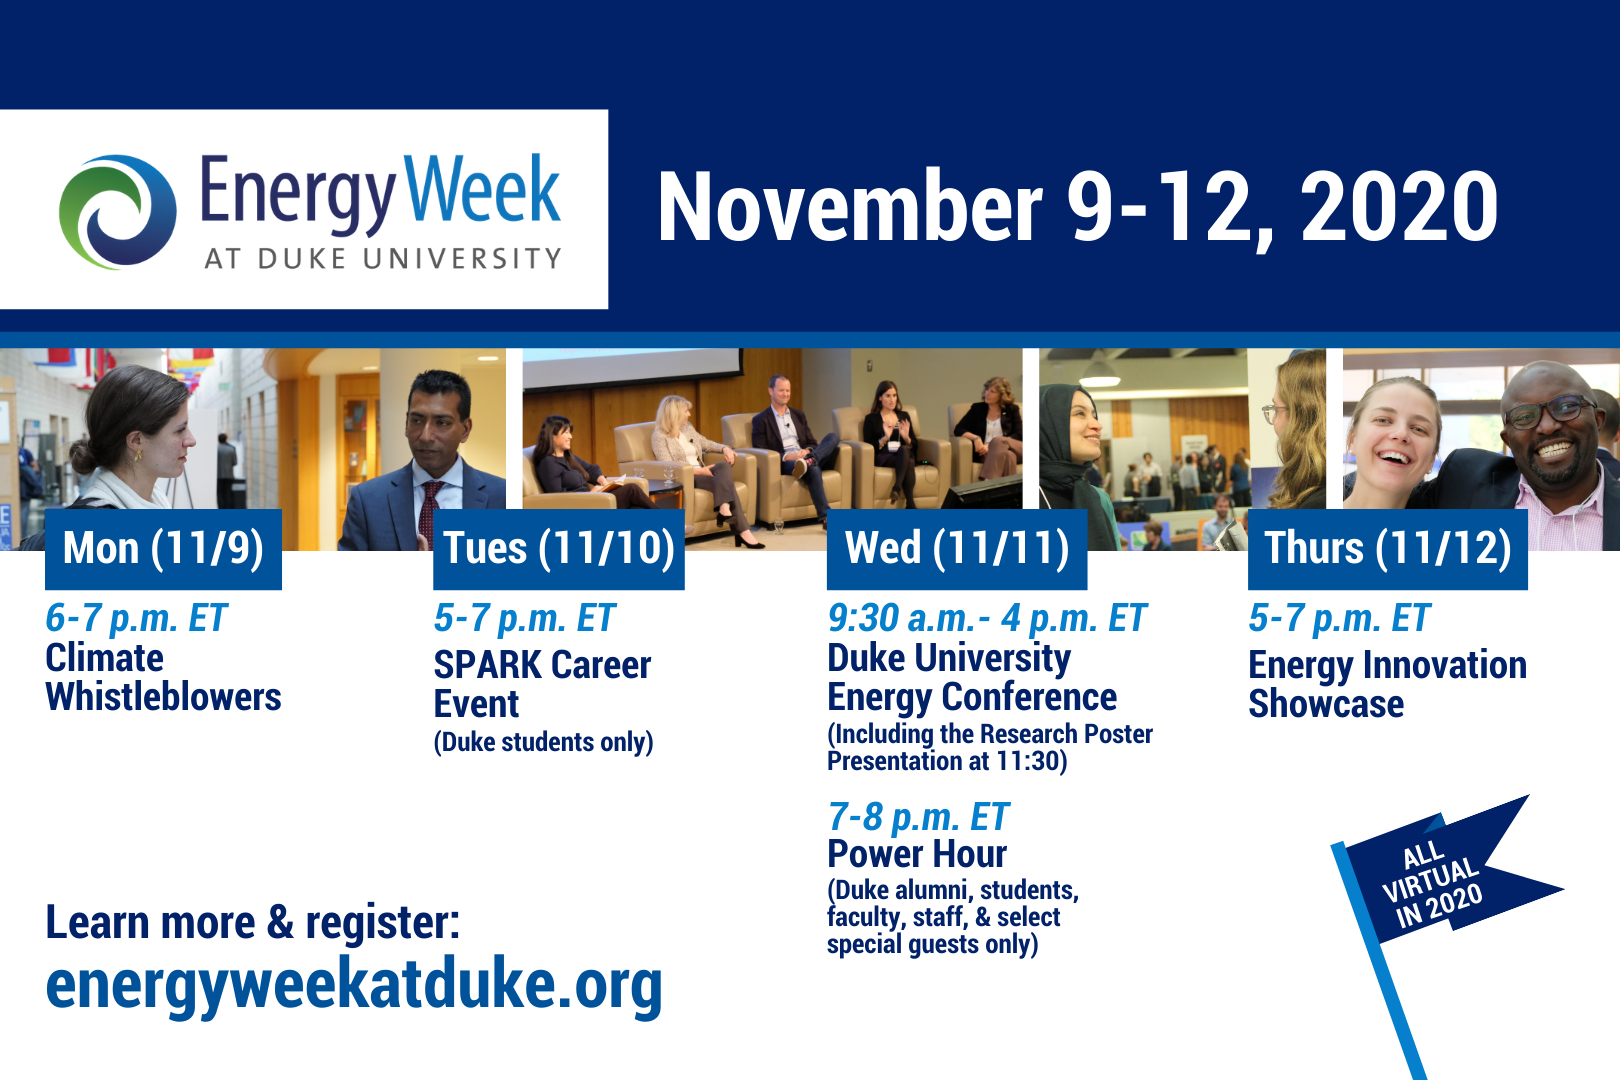 Save the dates for Energy Week 2020!